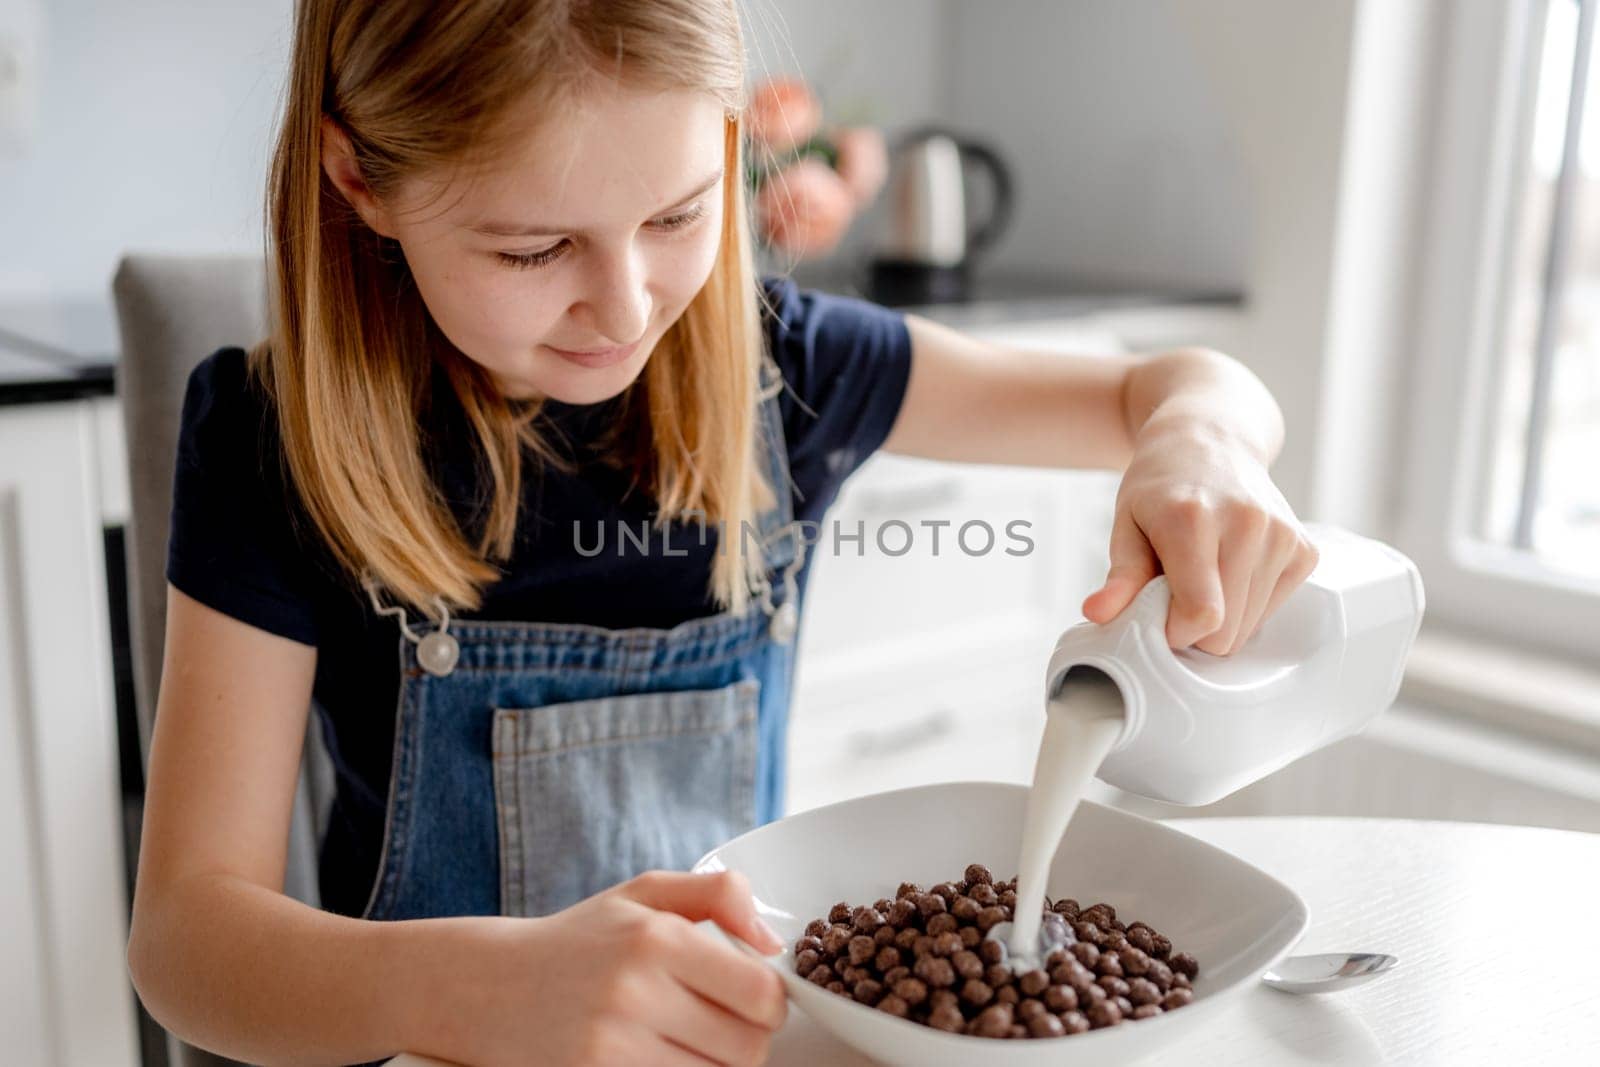 Cute Girl Pours Milk Into Bowl With Cereal by tan4ikk1